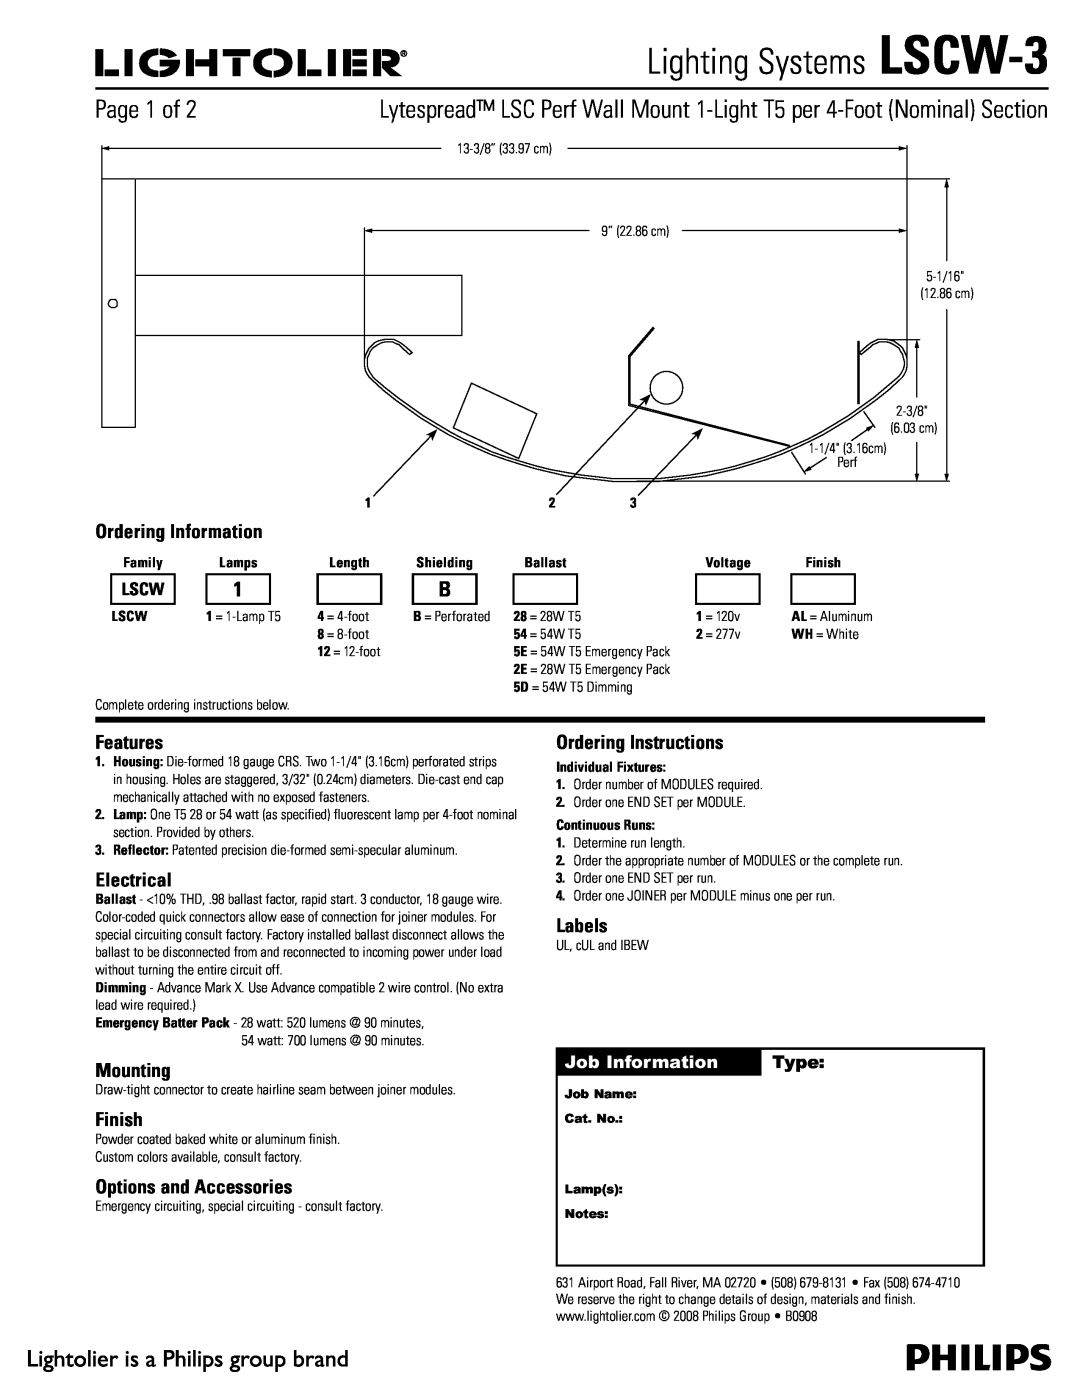 Lightolier LSCW-3 manual Ordering Information, Features, Electrical, Mounting, Finish, Options and Accessories, Labels 